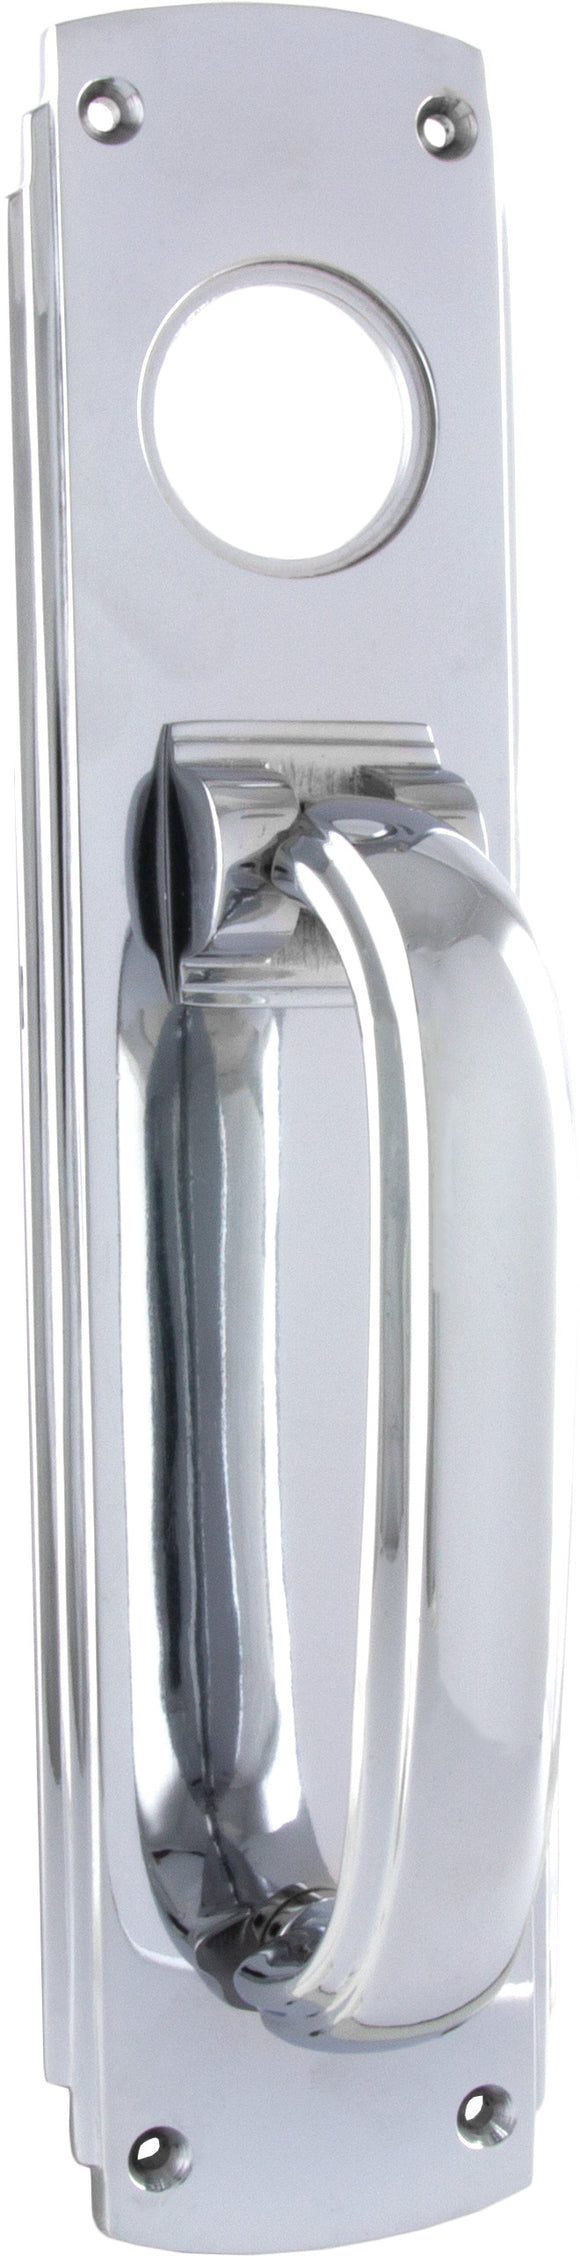 Pull Handle Knocker Art Deco Cylinder Hole Chrome Plated H240xW60mm